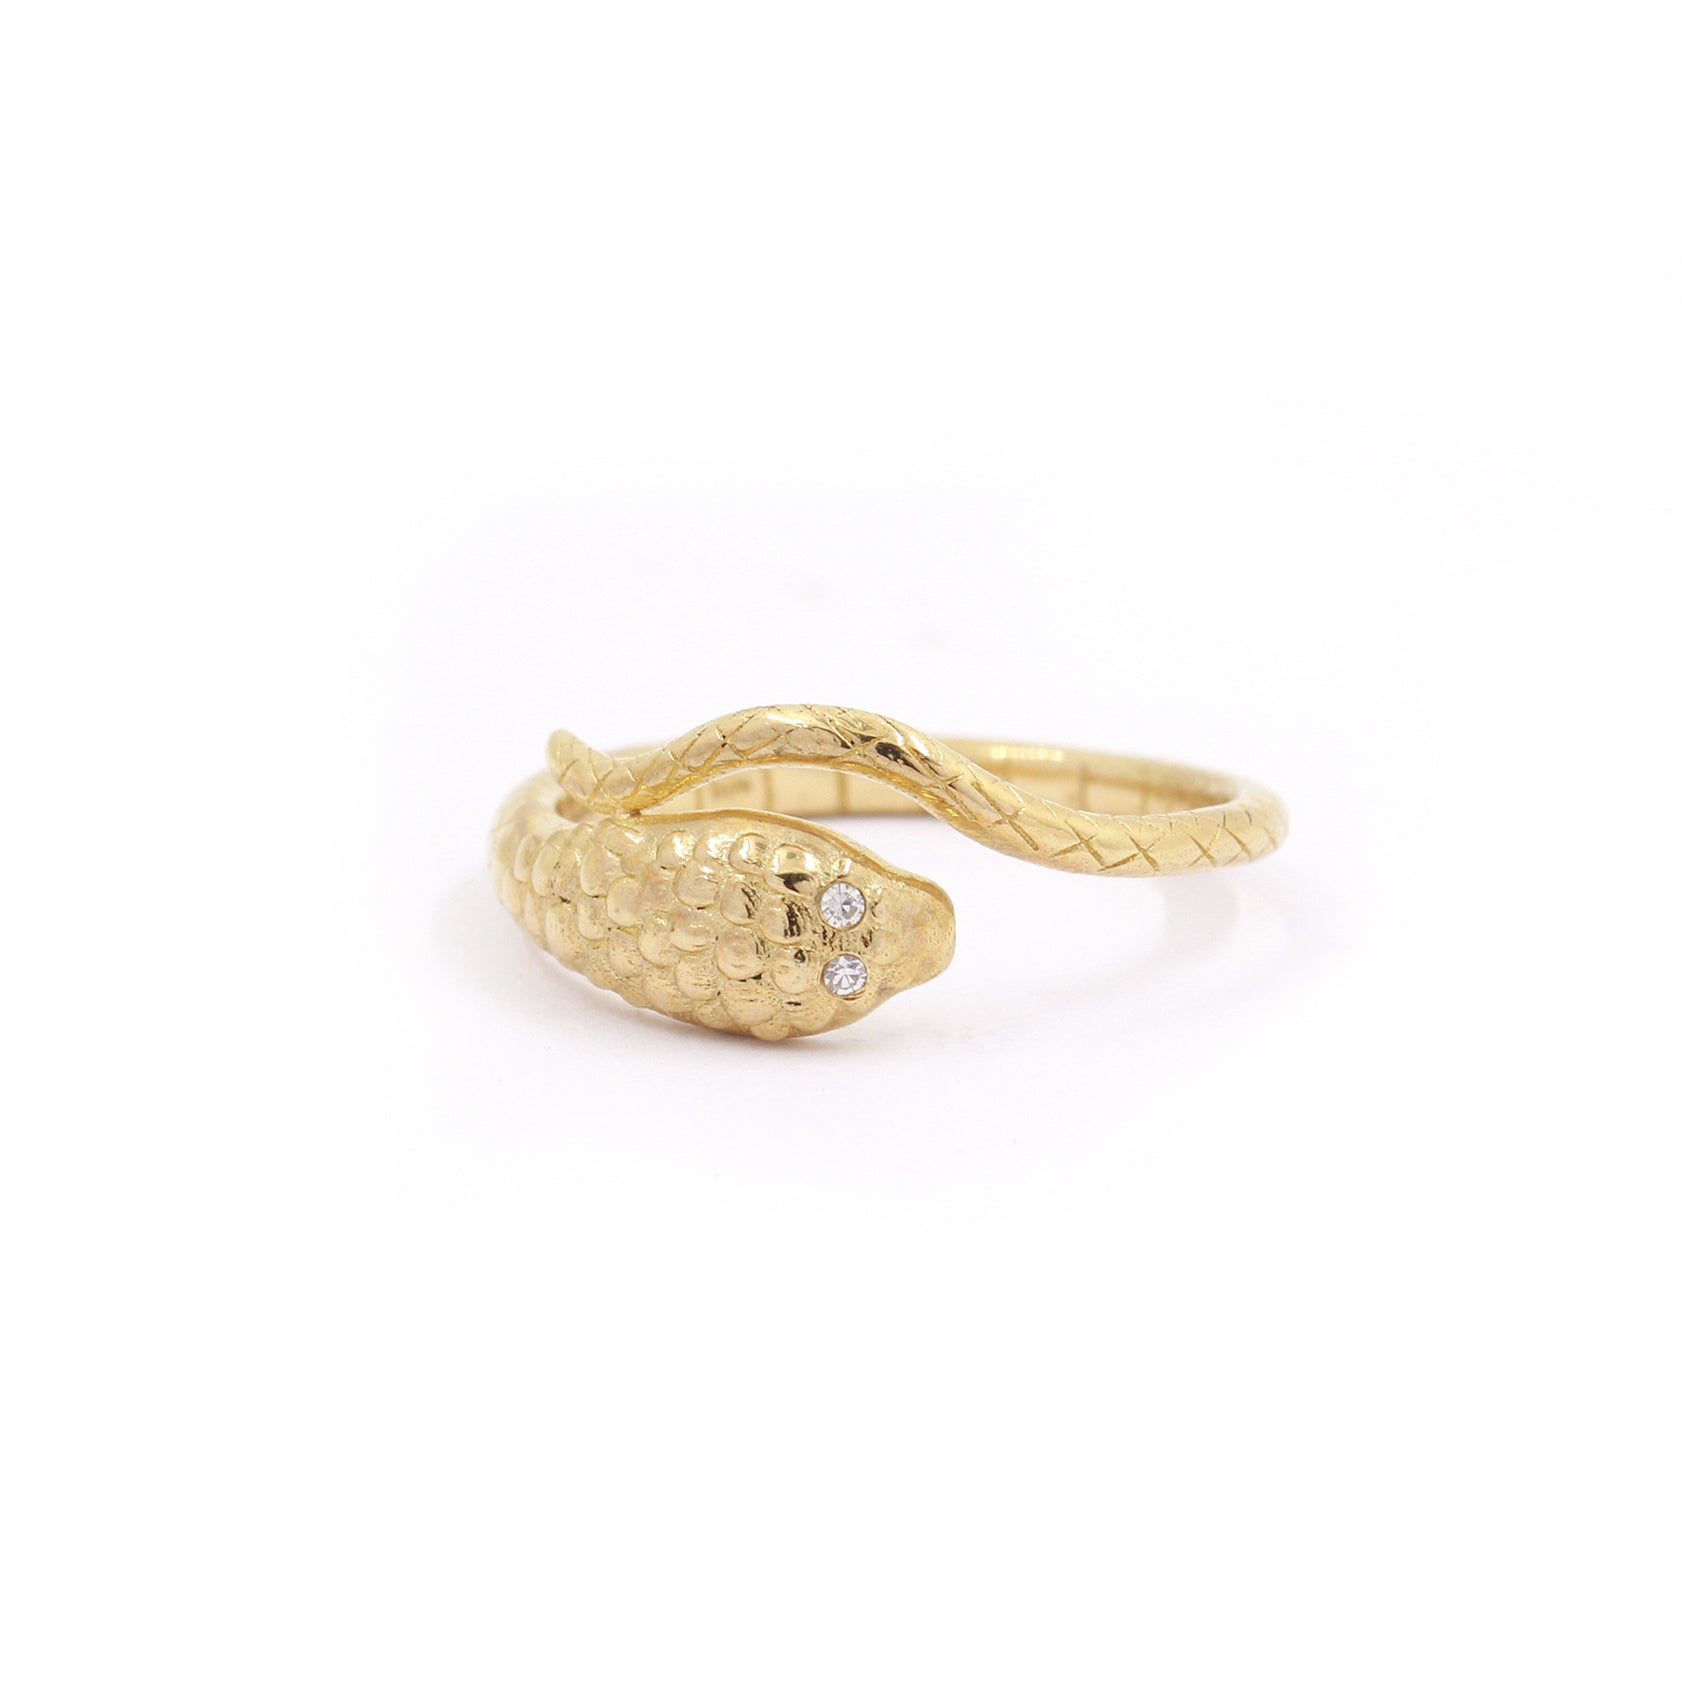 Exquisite Gold Snake Diamond Ring